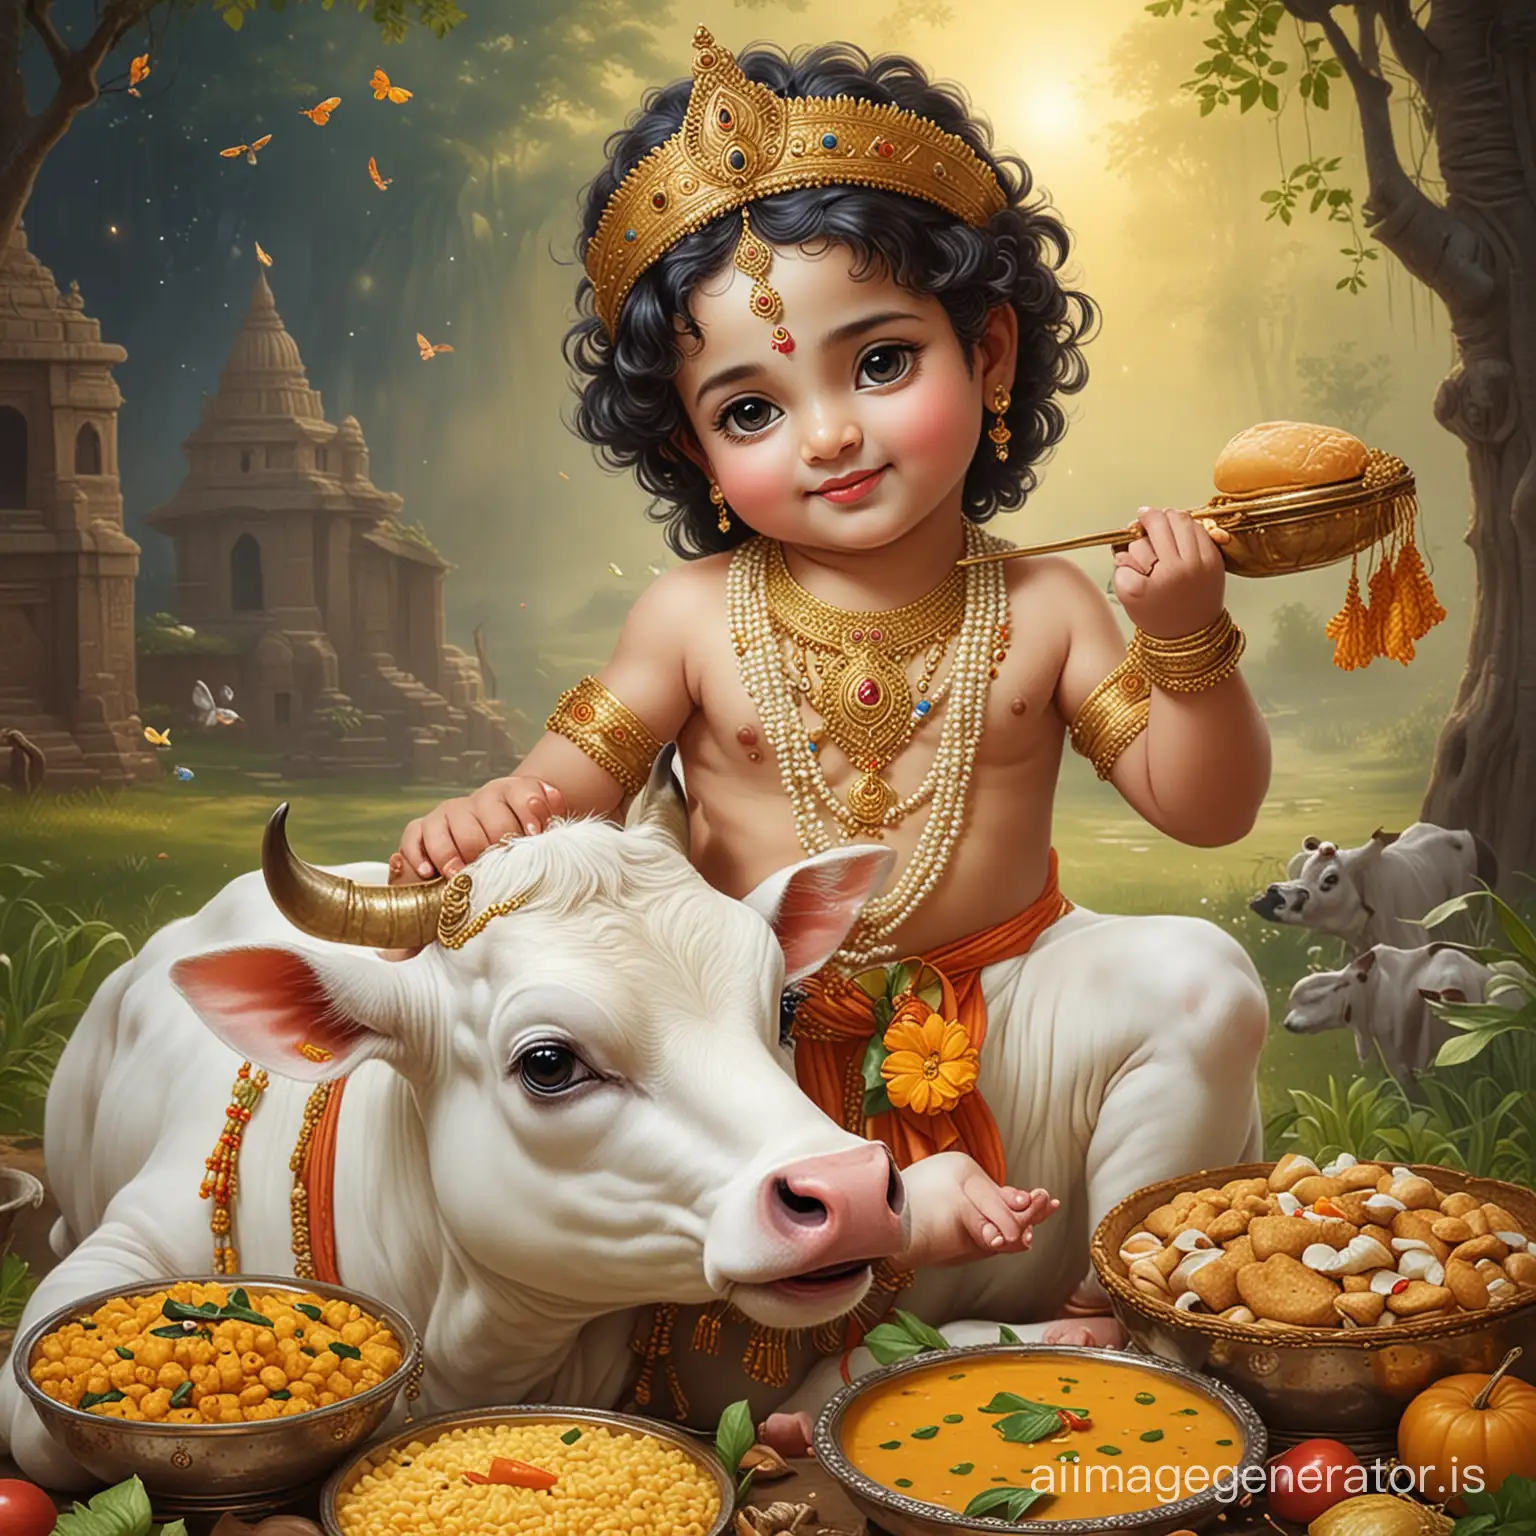 Adorable-Krishna-Enjoying-a-Pastoral-Feast-with-Cows